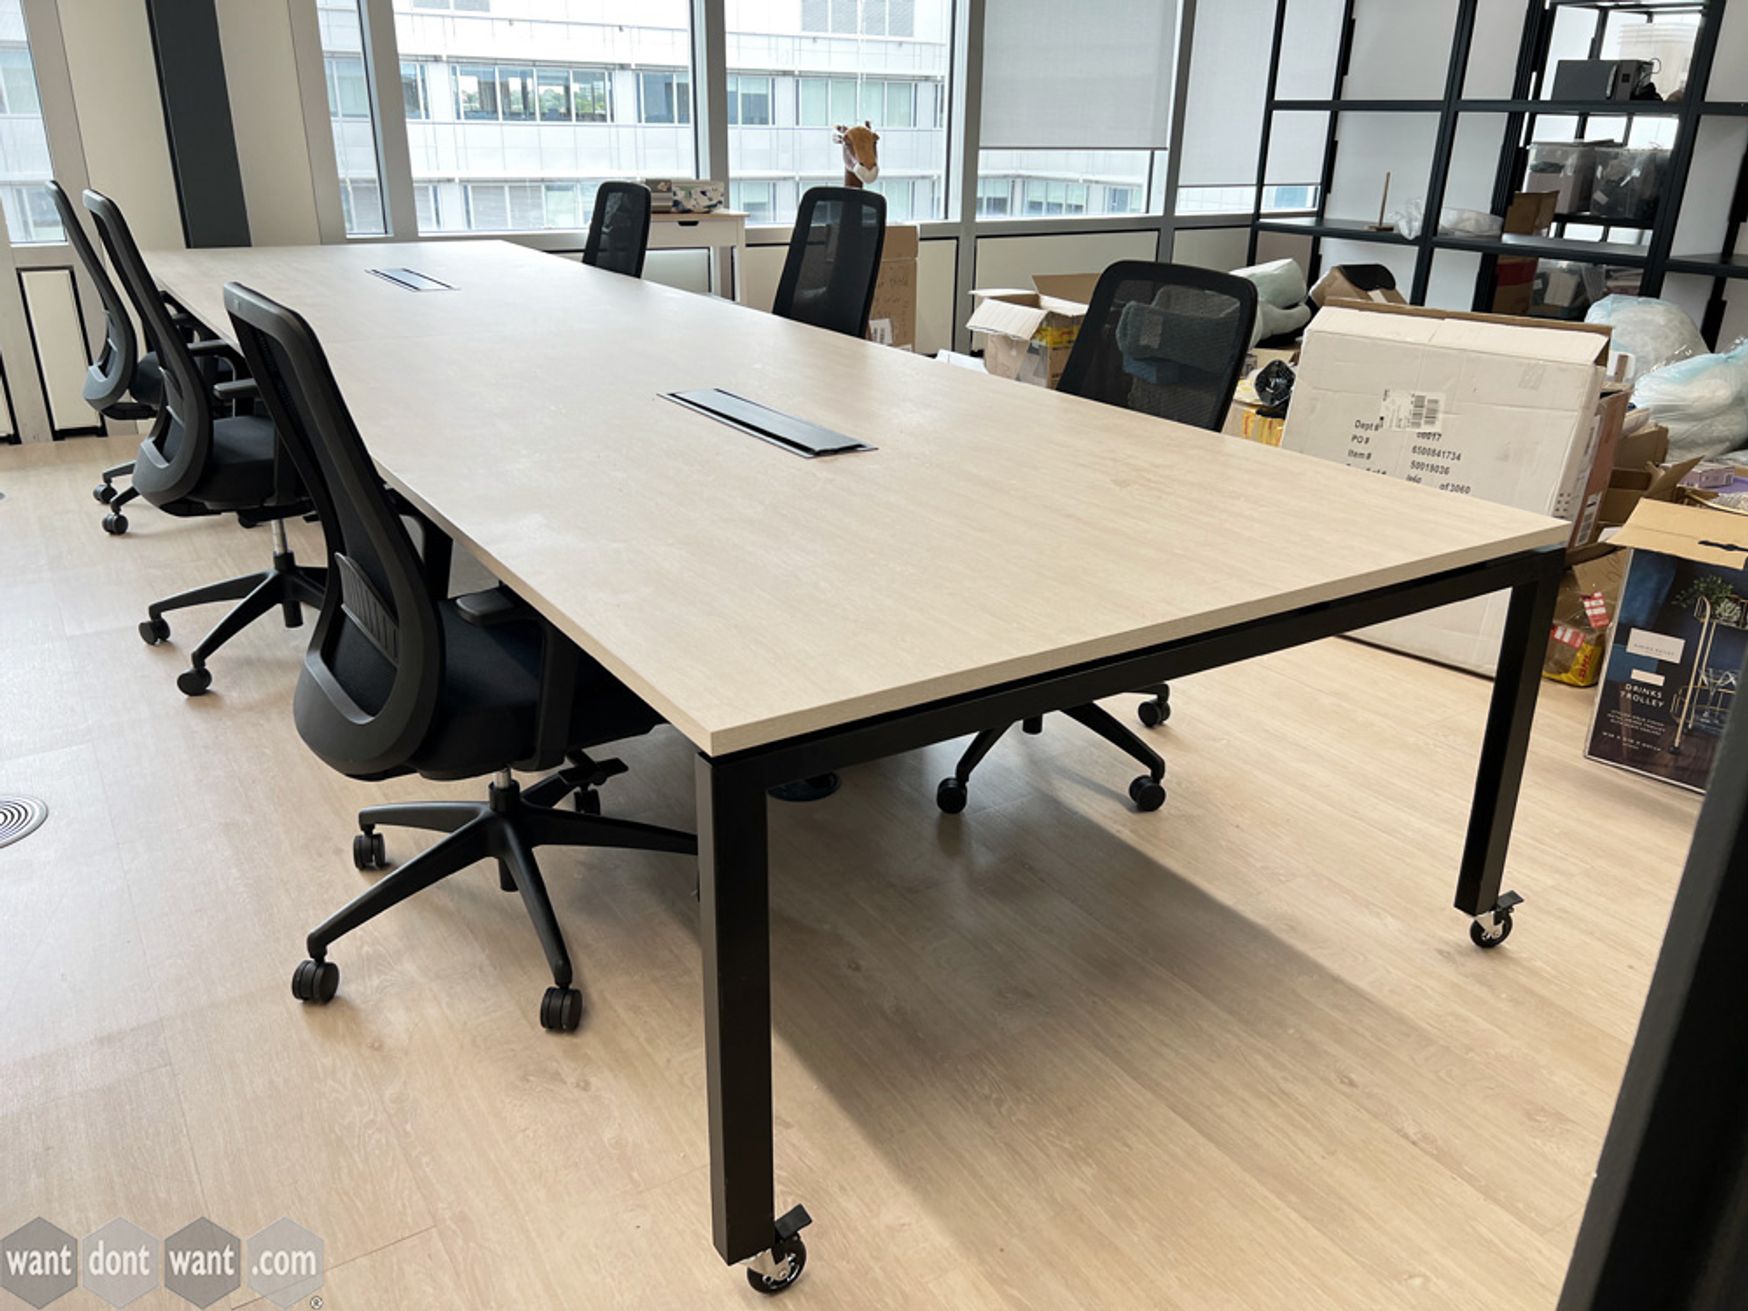 Used 4800mm 8-person bench desks with white oak top and black legs on castors
